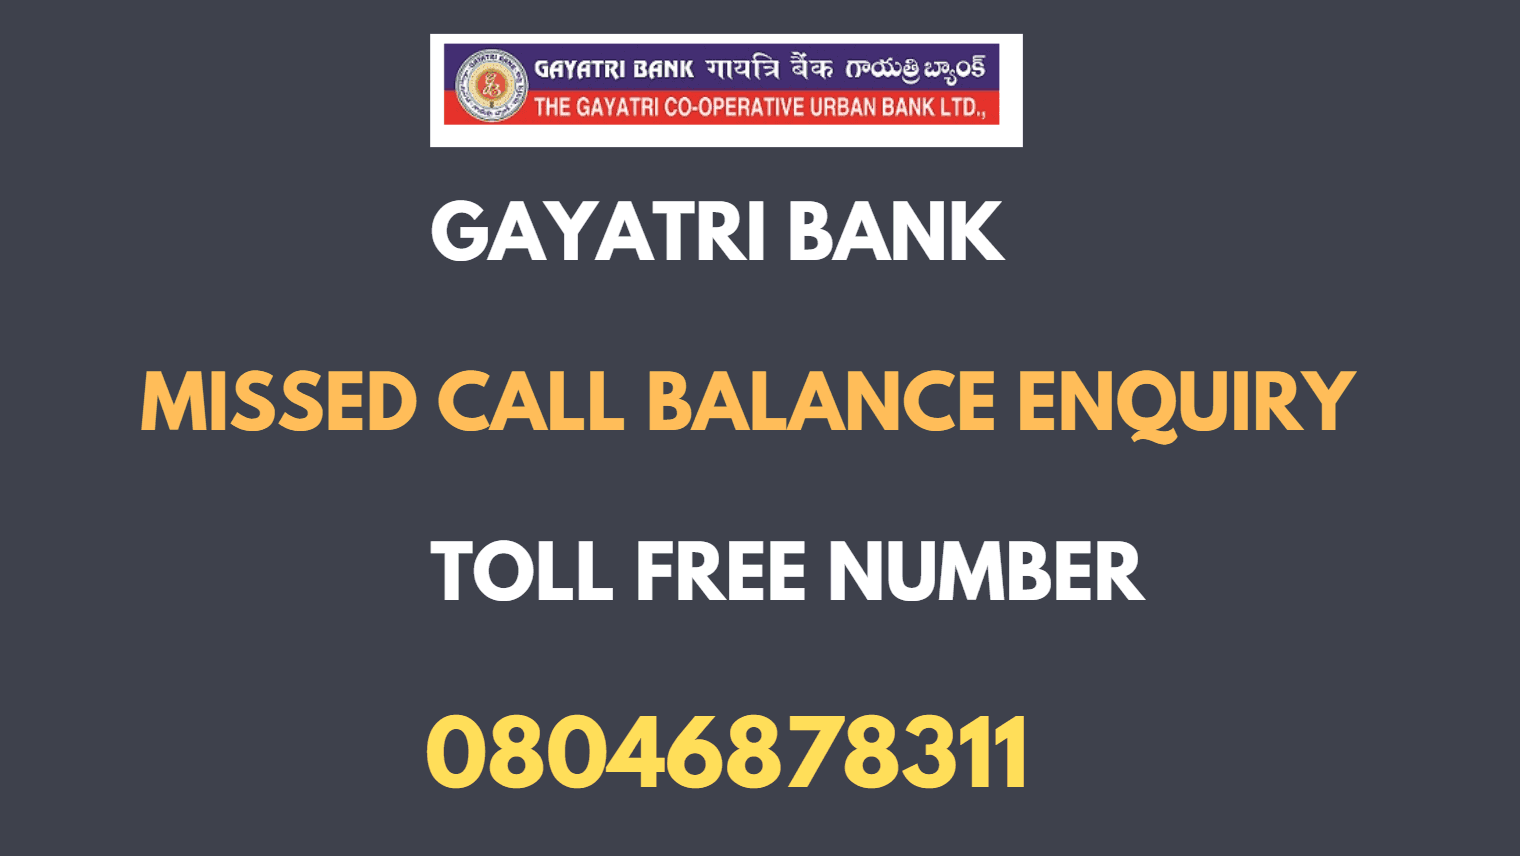 Gayatri Bank Balance Enquiry Missed Call toll free Number